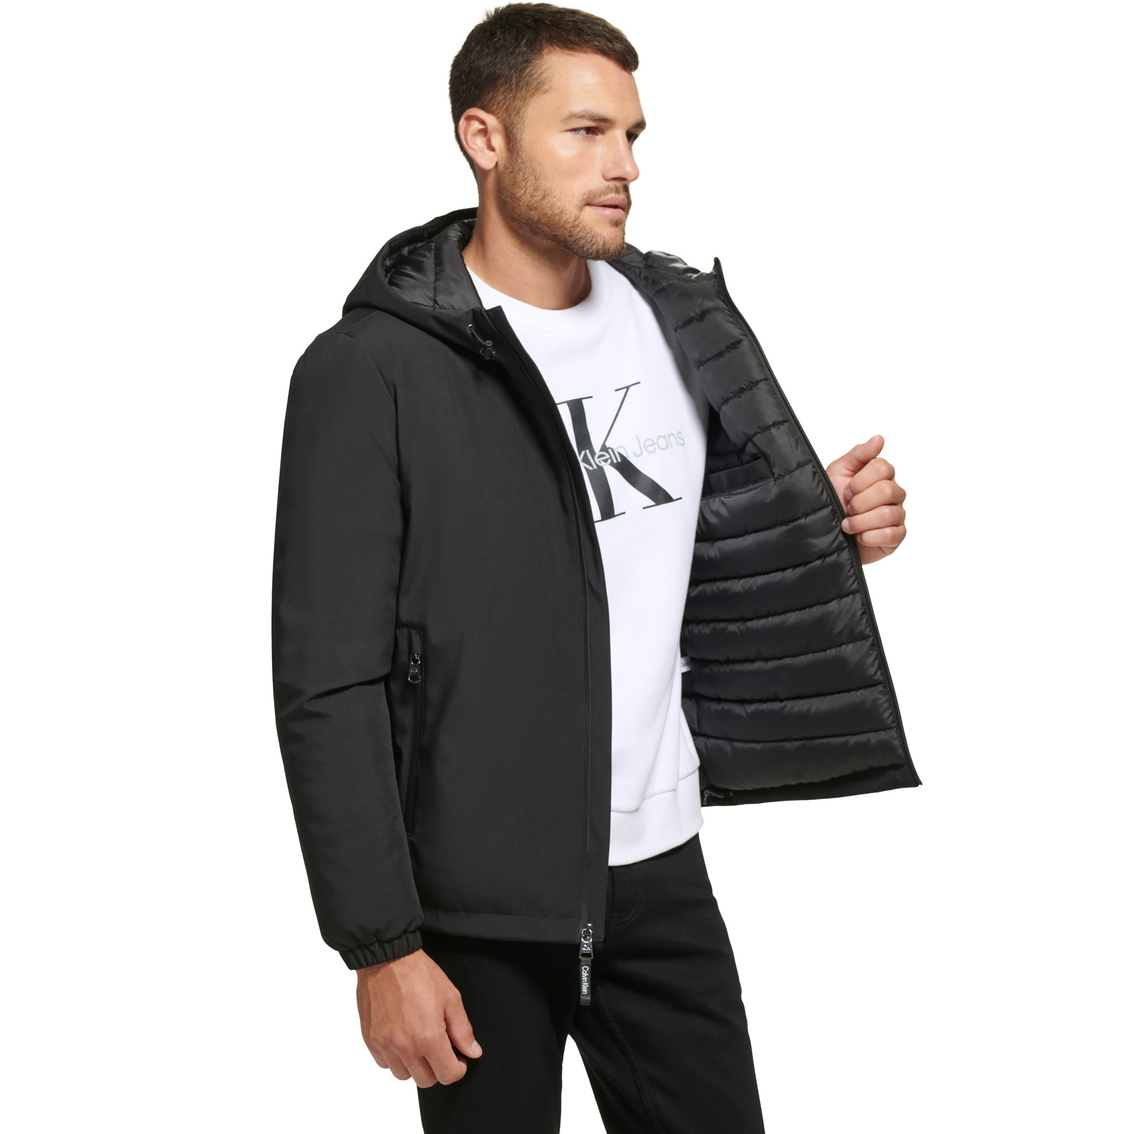 Calvin Klein Hooded Stretch Jacket - Image 7 of 10